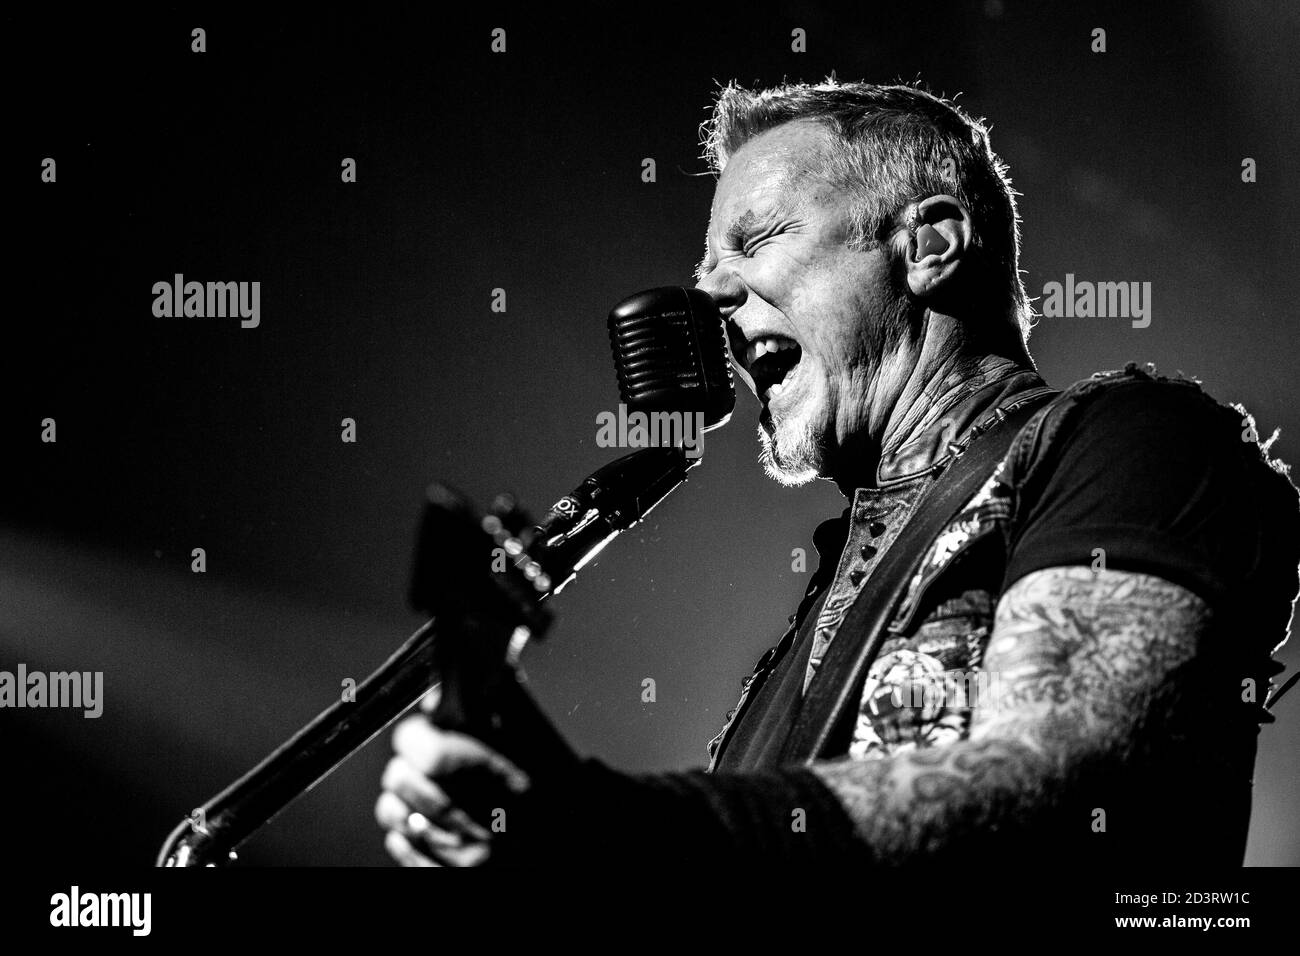 Copenhagen, Denmark. 03rd, February 2017. The American heavy metal band Metallica performs live concerts at Royal Arena in Copenhagen as part of the WorldWired Tour 2016-2017. Here vocalist and guitarist James Hetfield is seen live on stage. (Photo credit: Gonzales Photo - Lasse Lagoni). Stock Photo